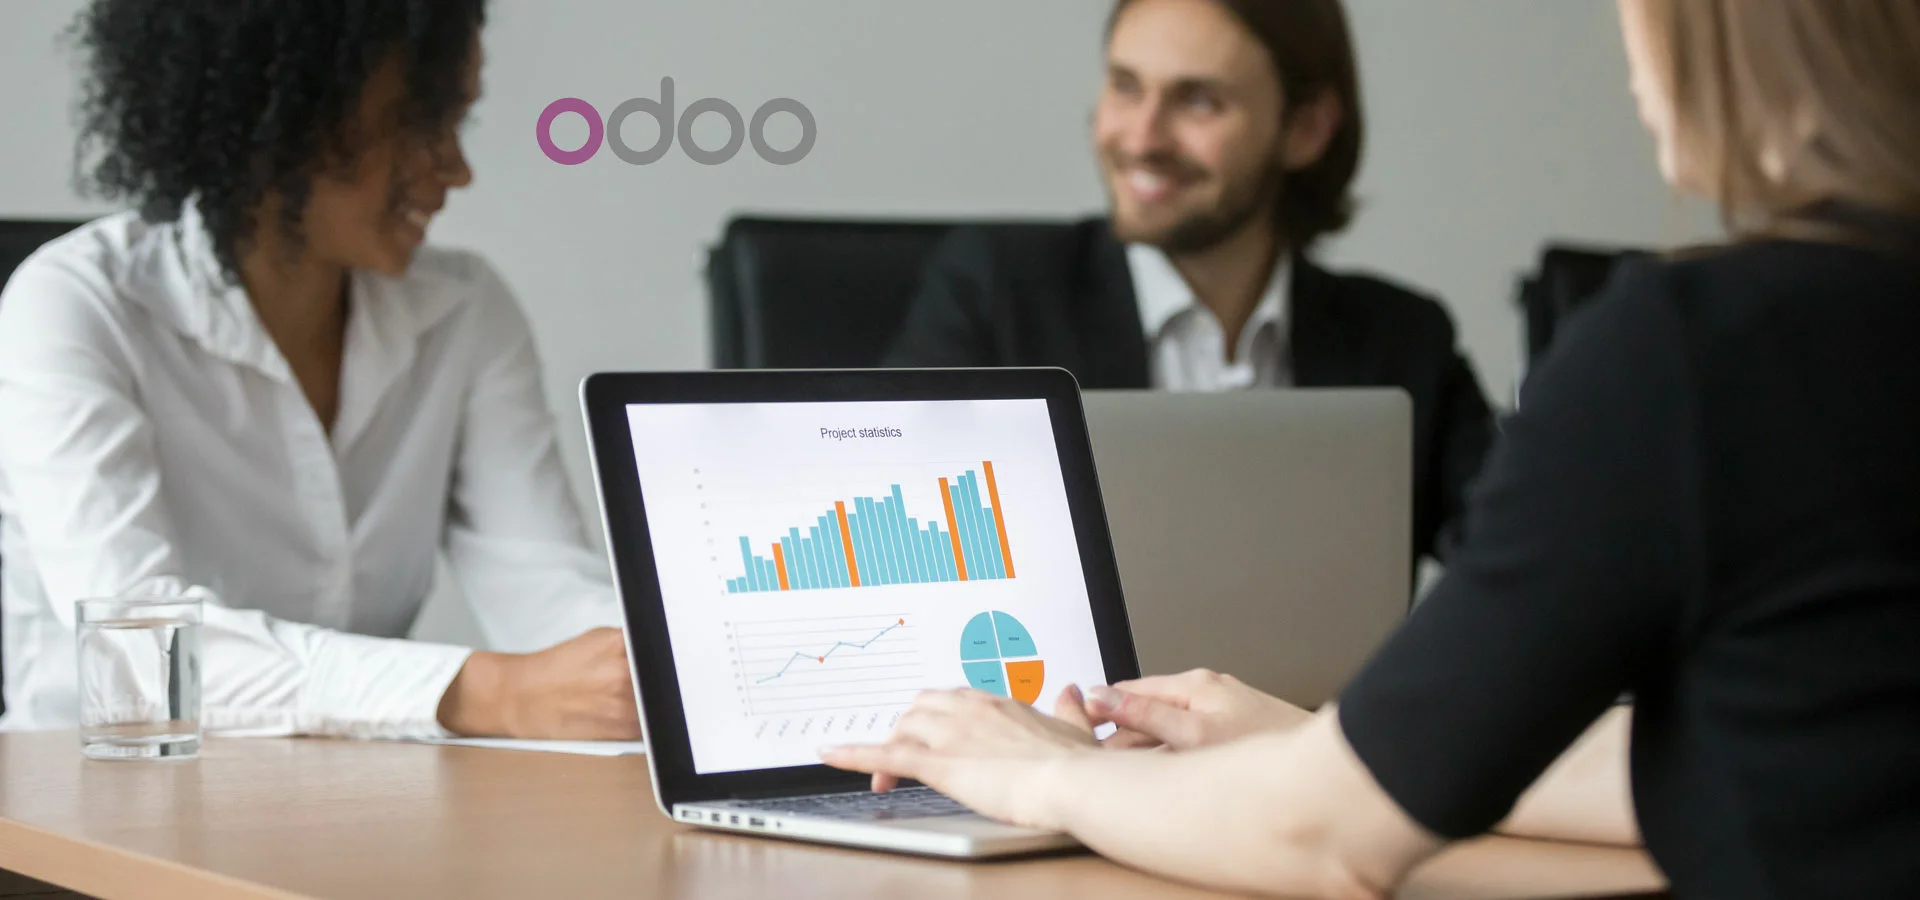 odoo-erp-support-and-services-related-blog-81